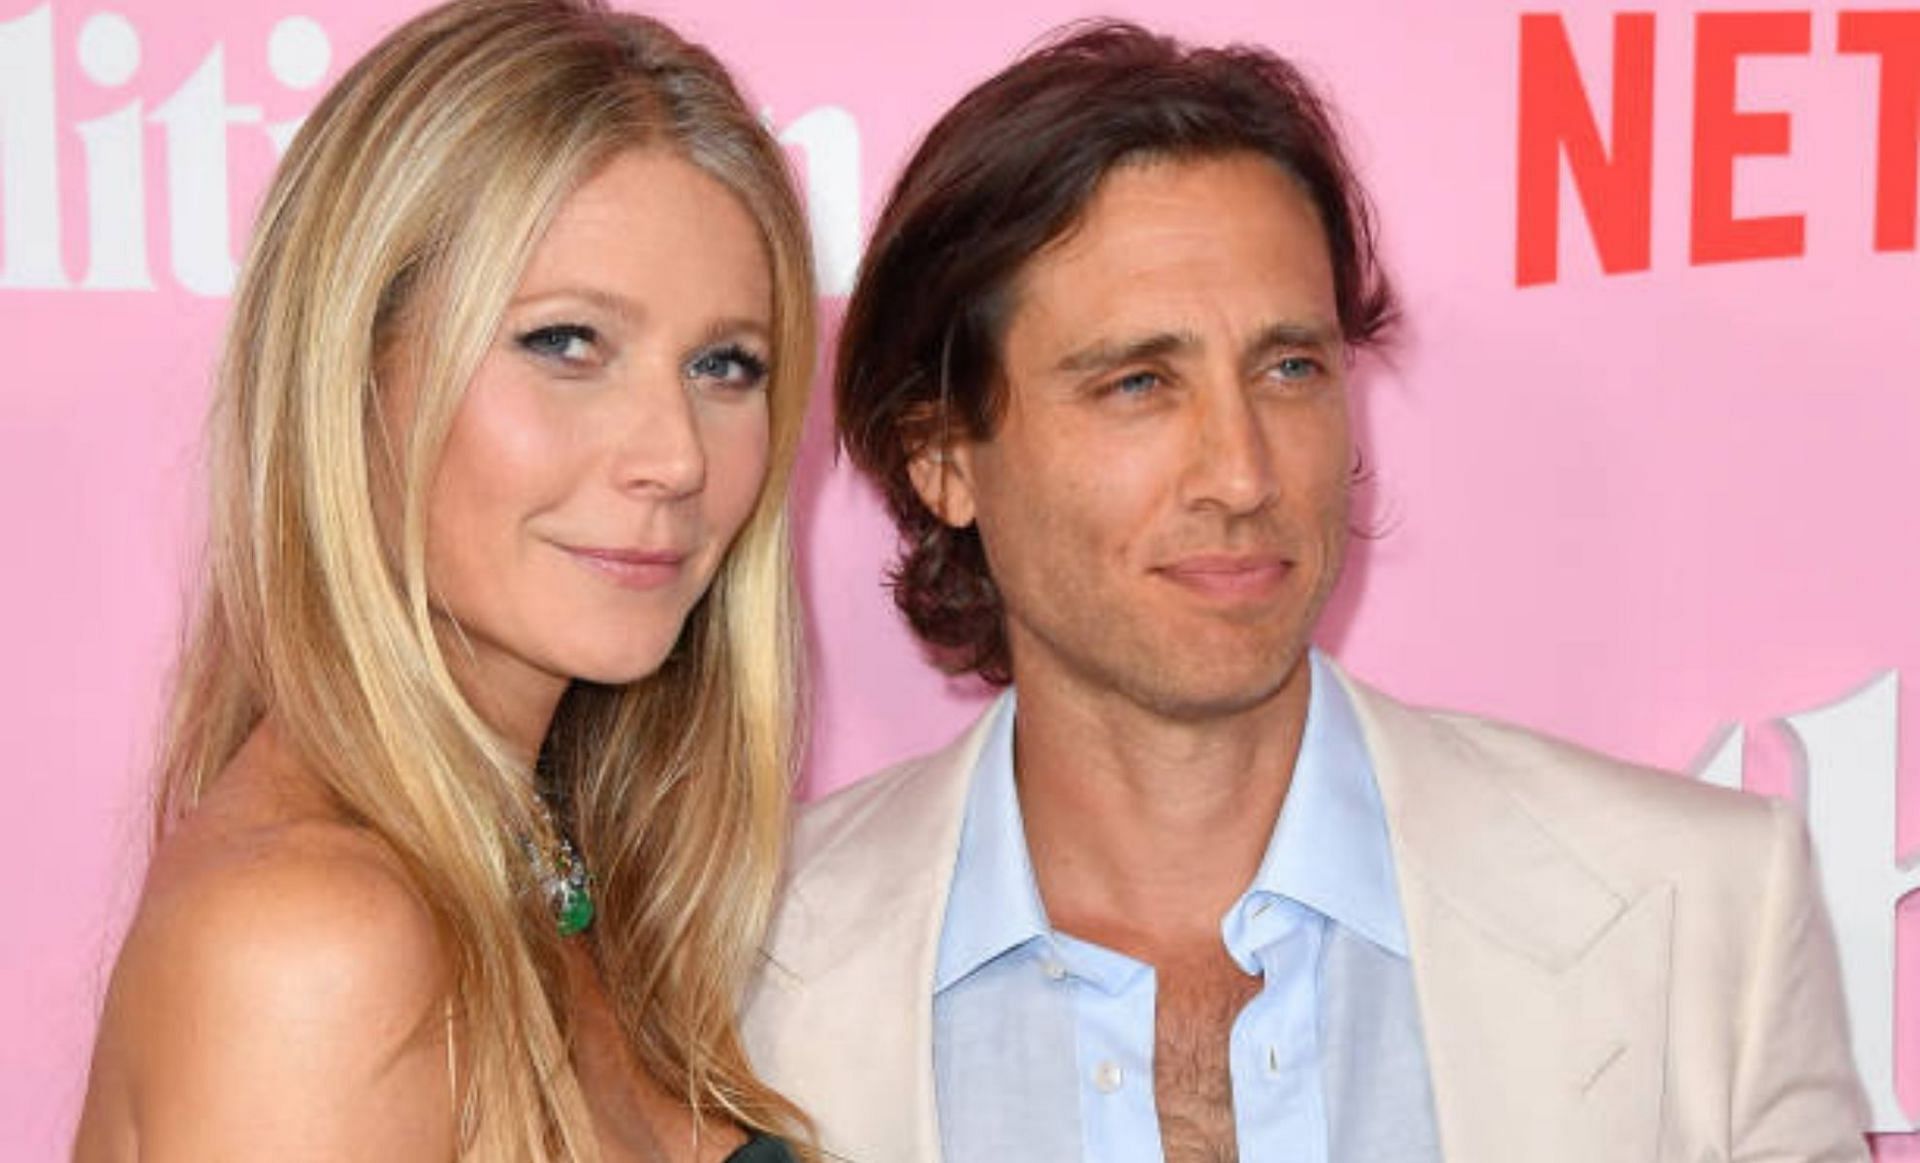 Gwyneth Paltrow shows beautiful blended family pictures with husband Brad Falchuk (Image va Getty Images)